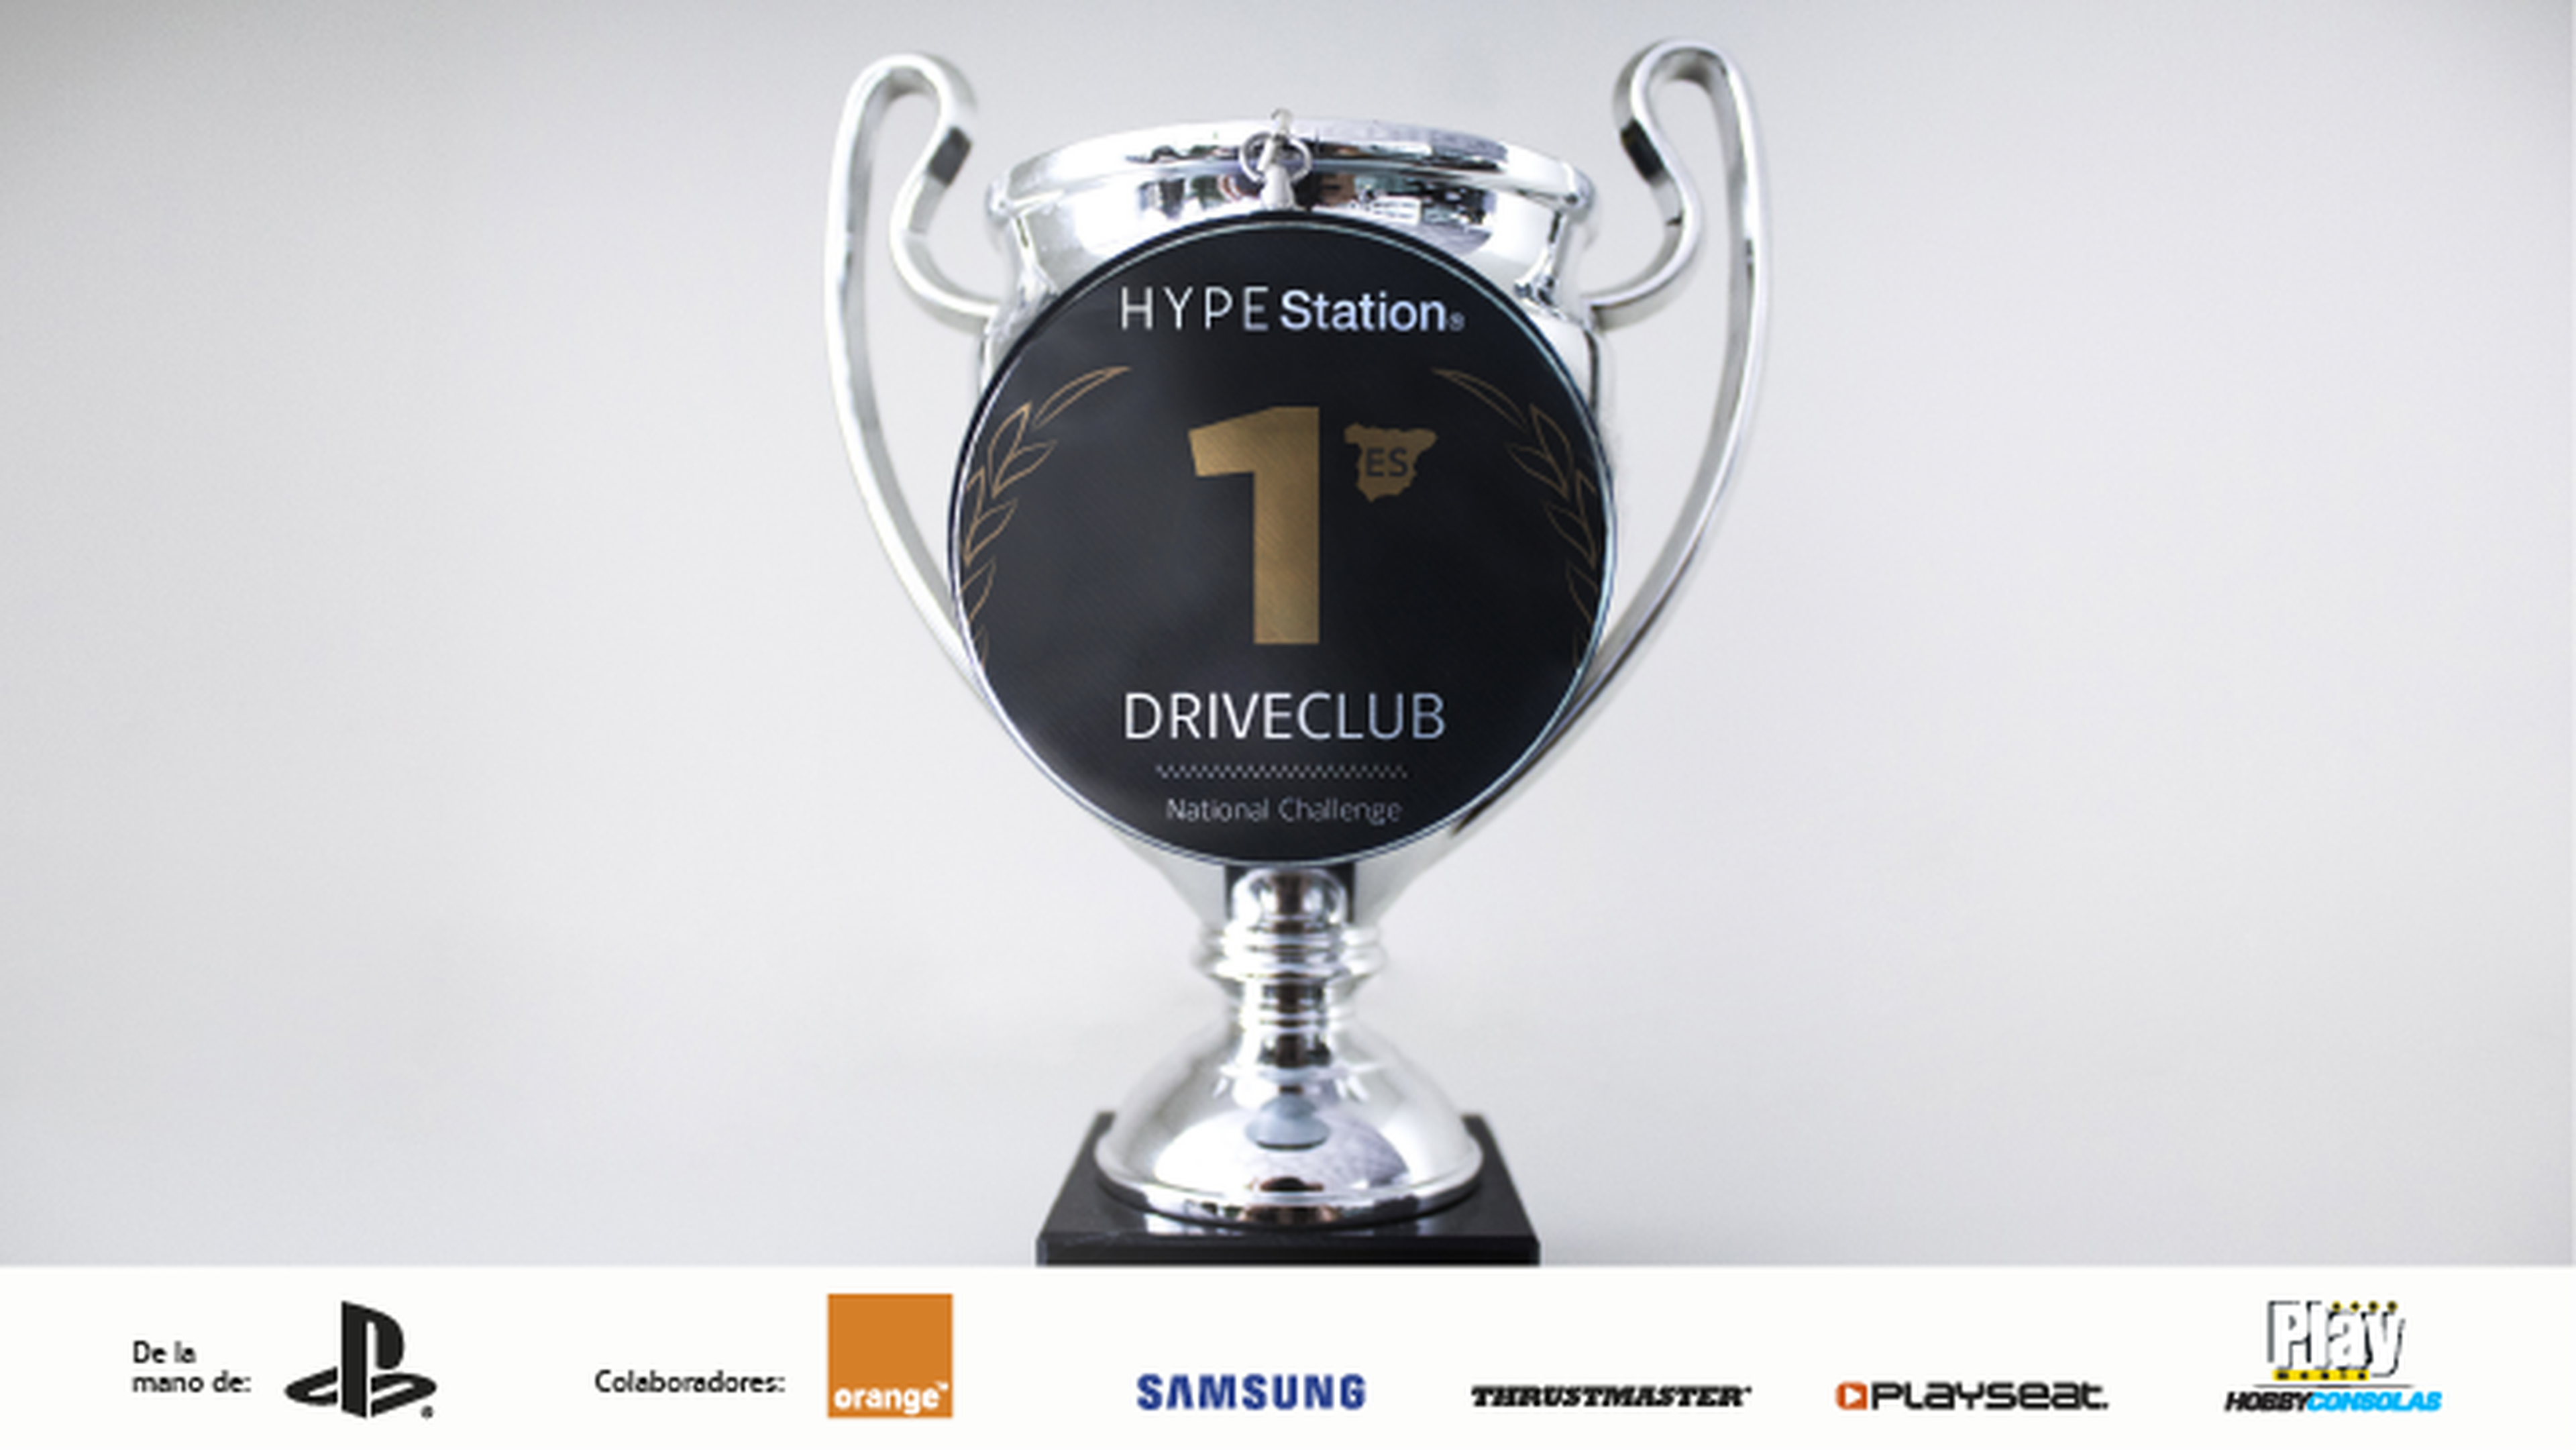 Trofeo Driveclub HYPE Station